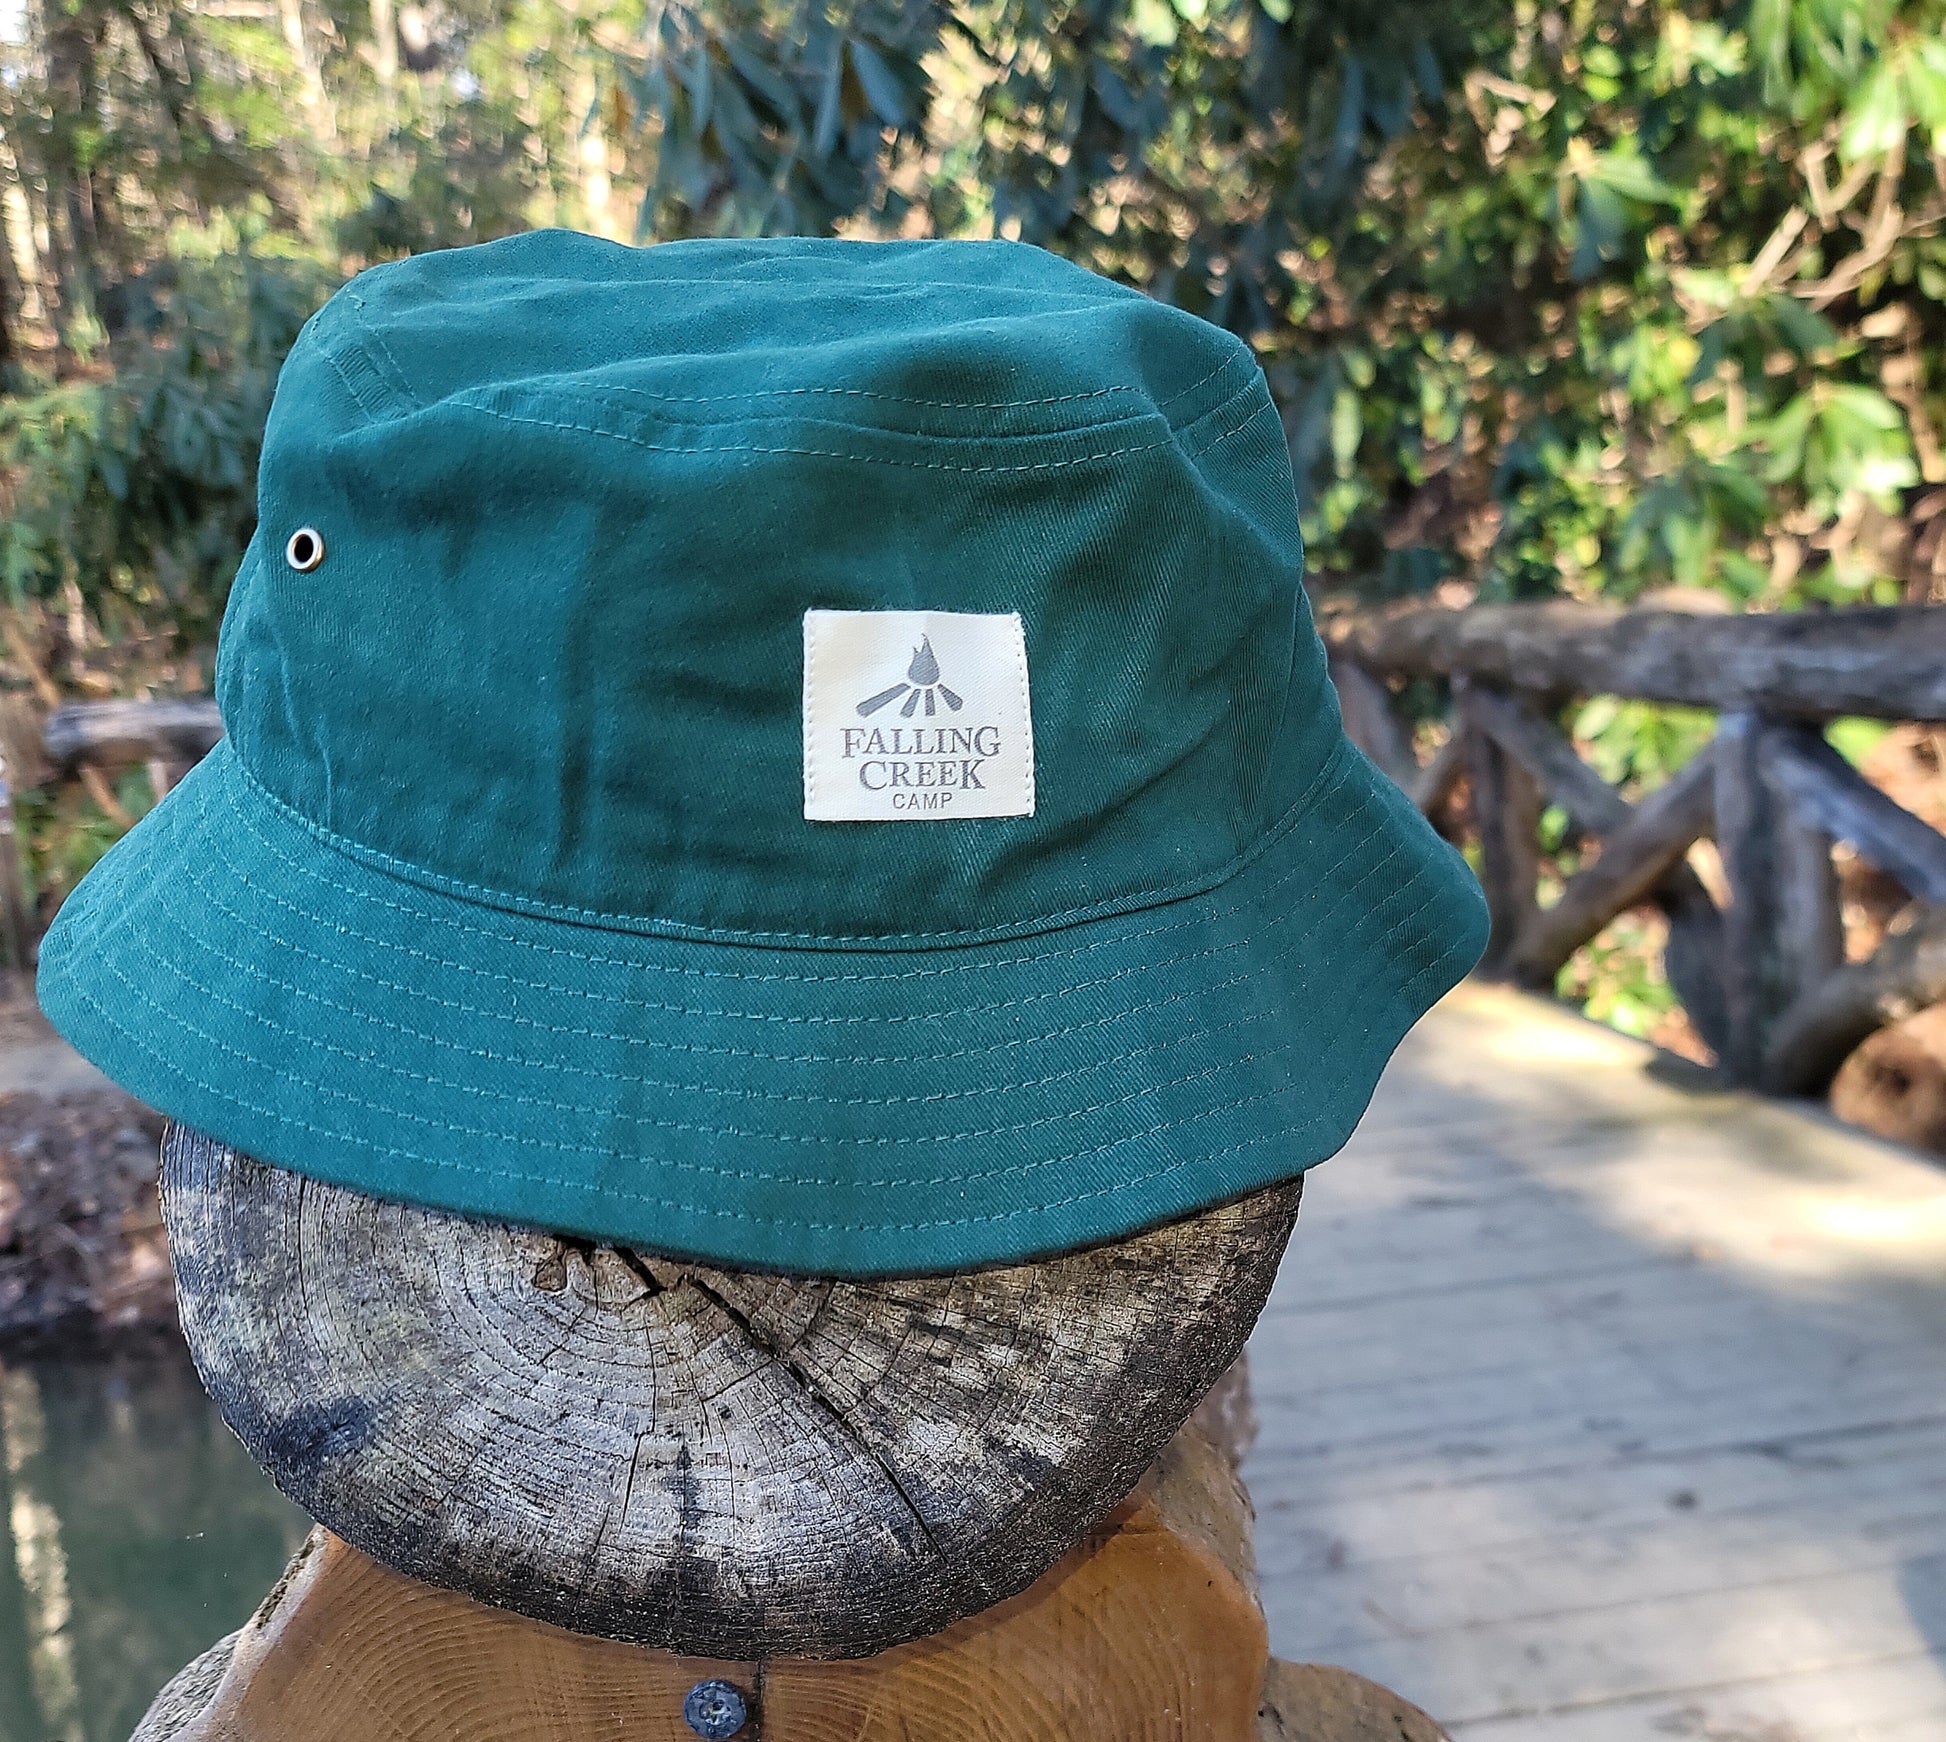 A forest green colored bucket hat with a tan logo on the front that reads "Falling Creek Camp" sits on the end post of a wooden bridge outdoors.